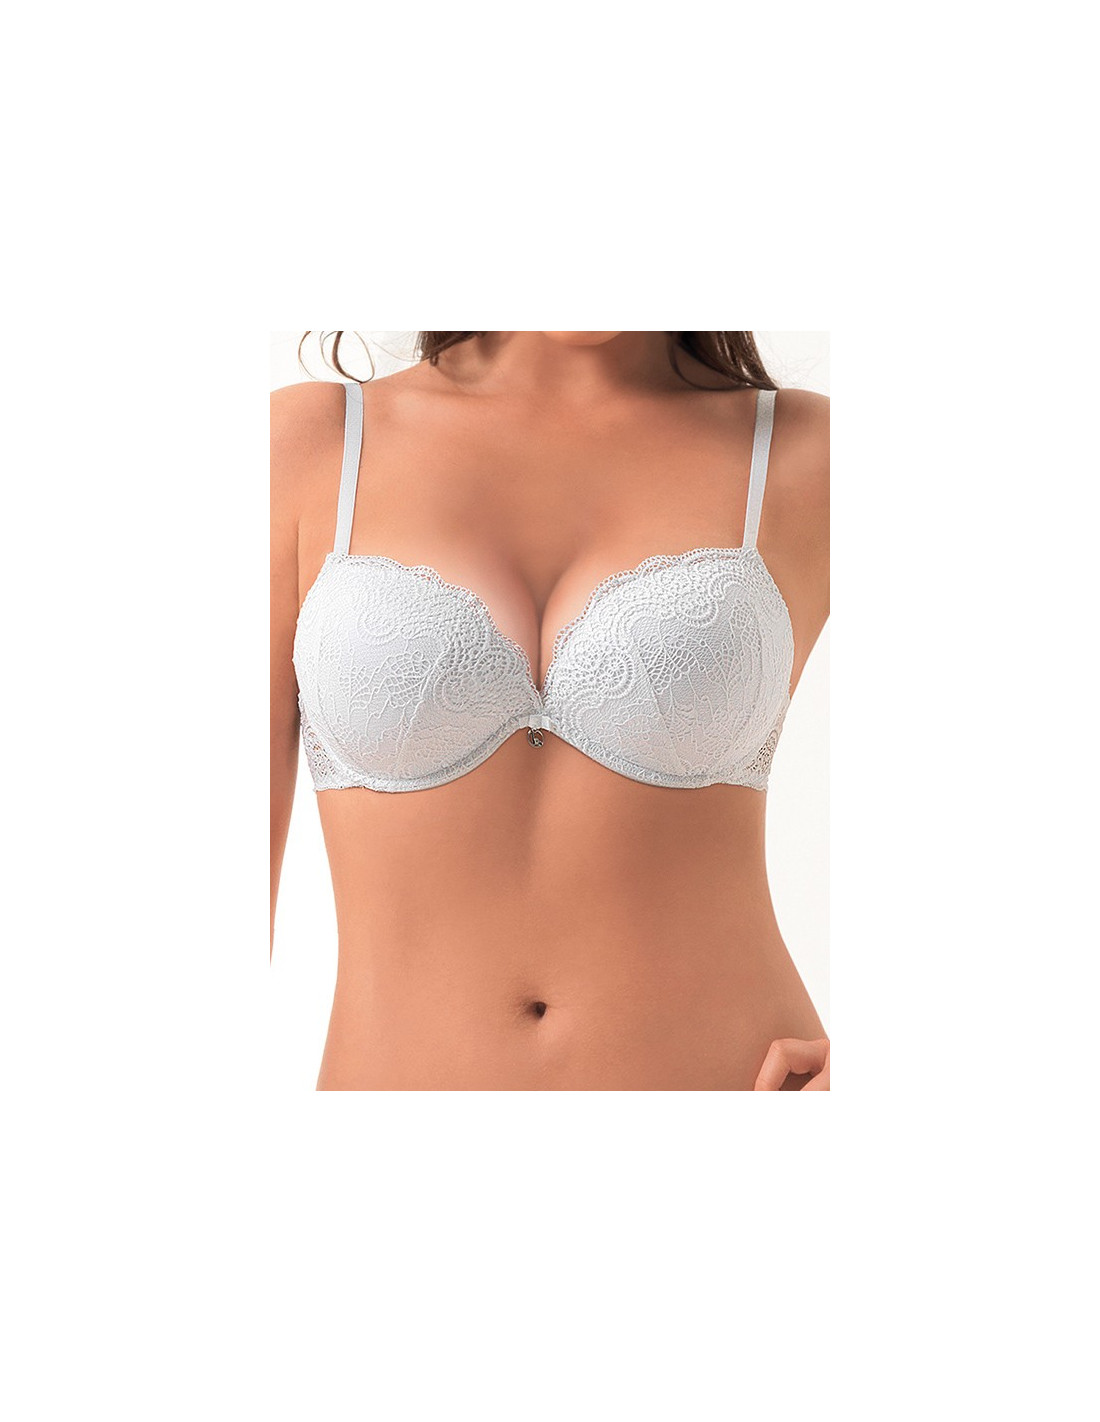 Double push up bra with clear back: Lormar Double Gloss Formedouble